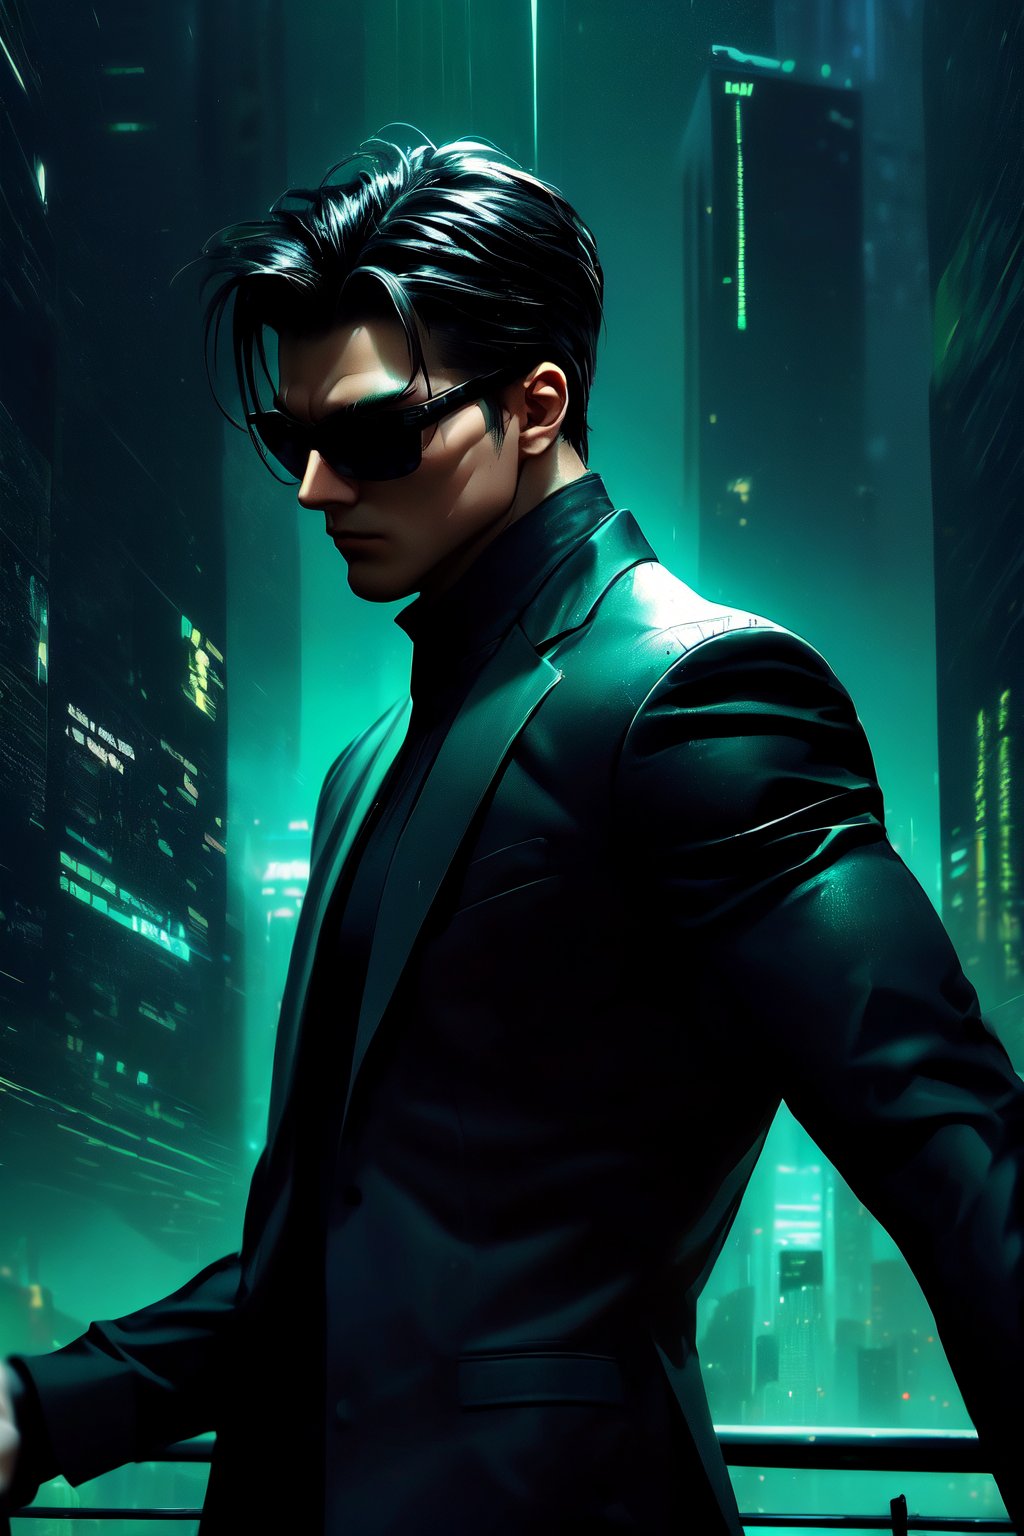 high-definition, dynamic, action-packed, 
1man, Matrix style, leaping, mid-air, all-black suit, black glasses, athletic build, intense expression, 
((depth of field)), urban skyline, futuristic cityscape, dark ambiance, digital code rain, neon lights, gorgeous movements, Code matrix cascading from top to bottom, by FuturEvoLab, 
gravity-defying, cyberpunk atmosphere, surreal, digital world, ,Human bones